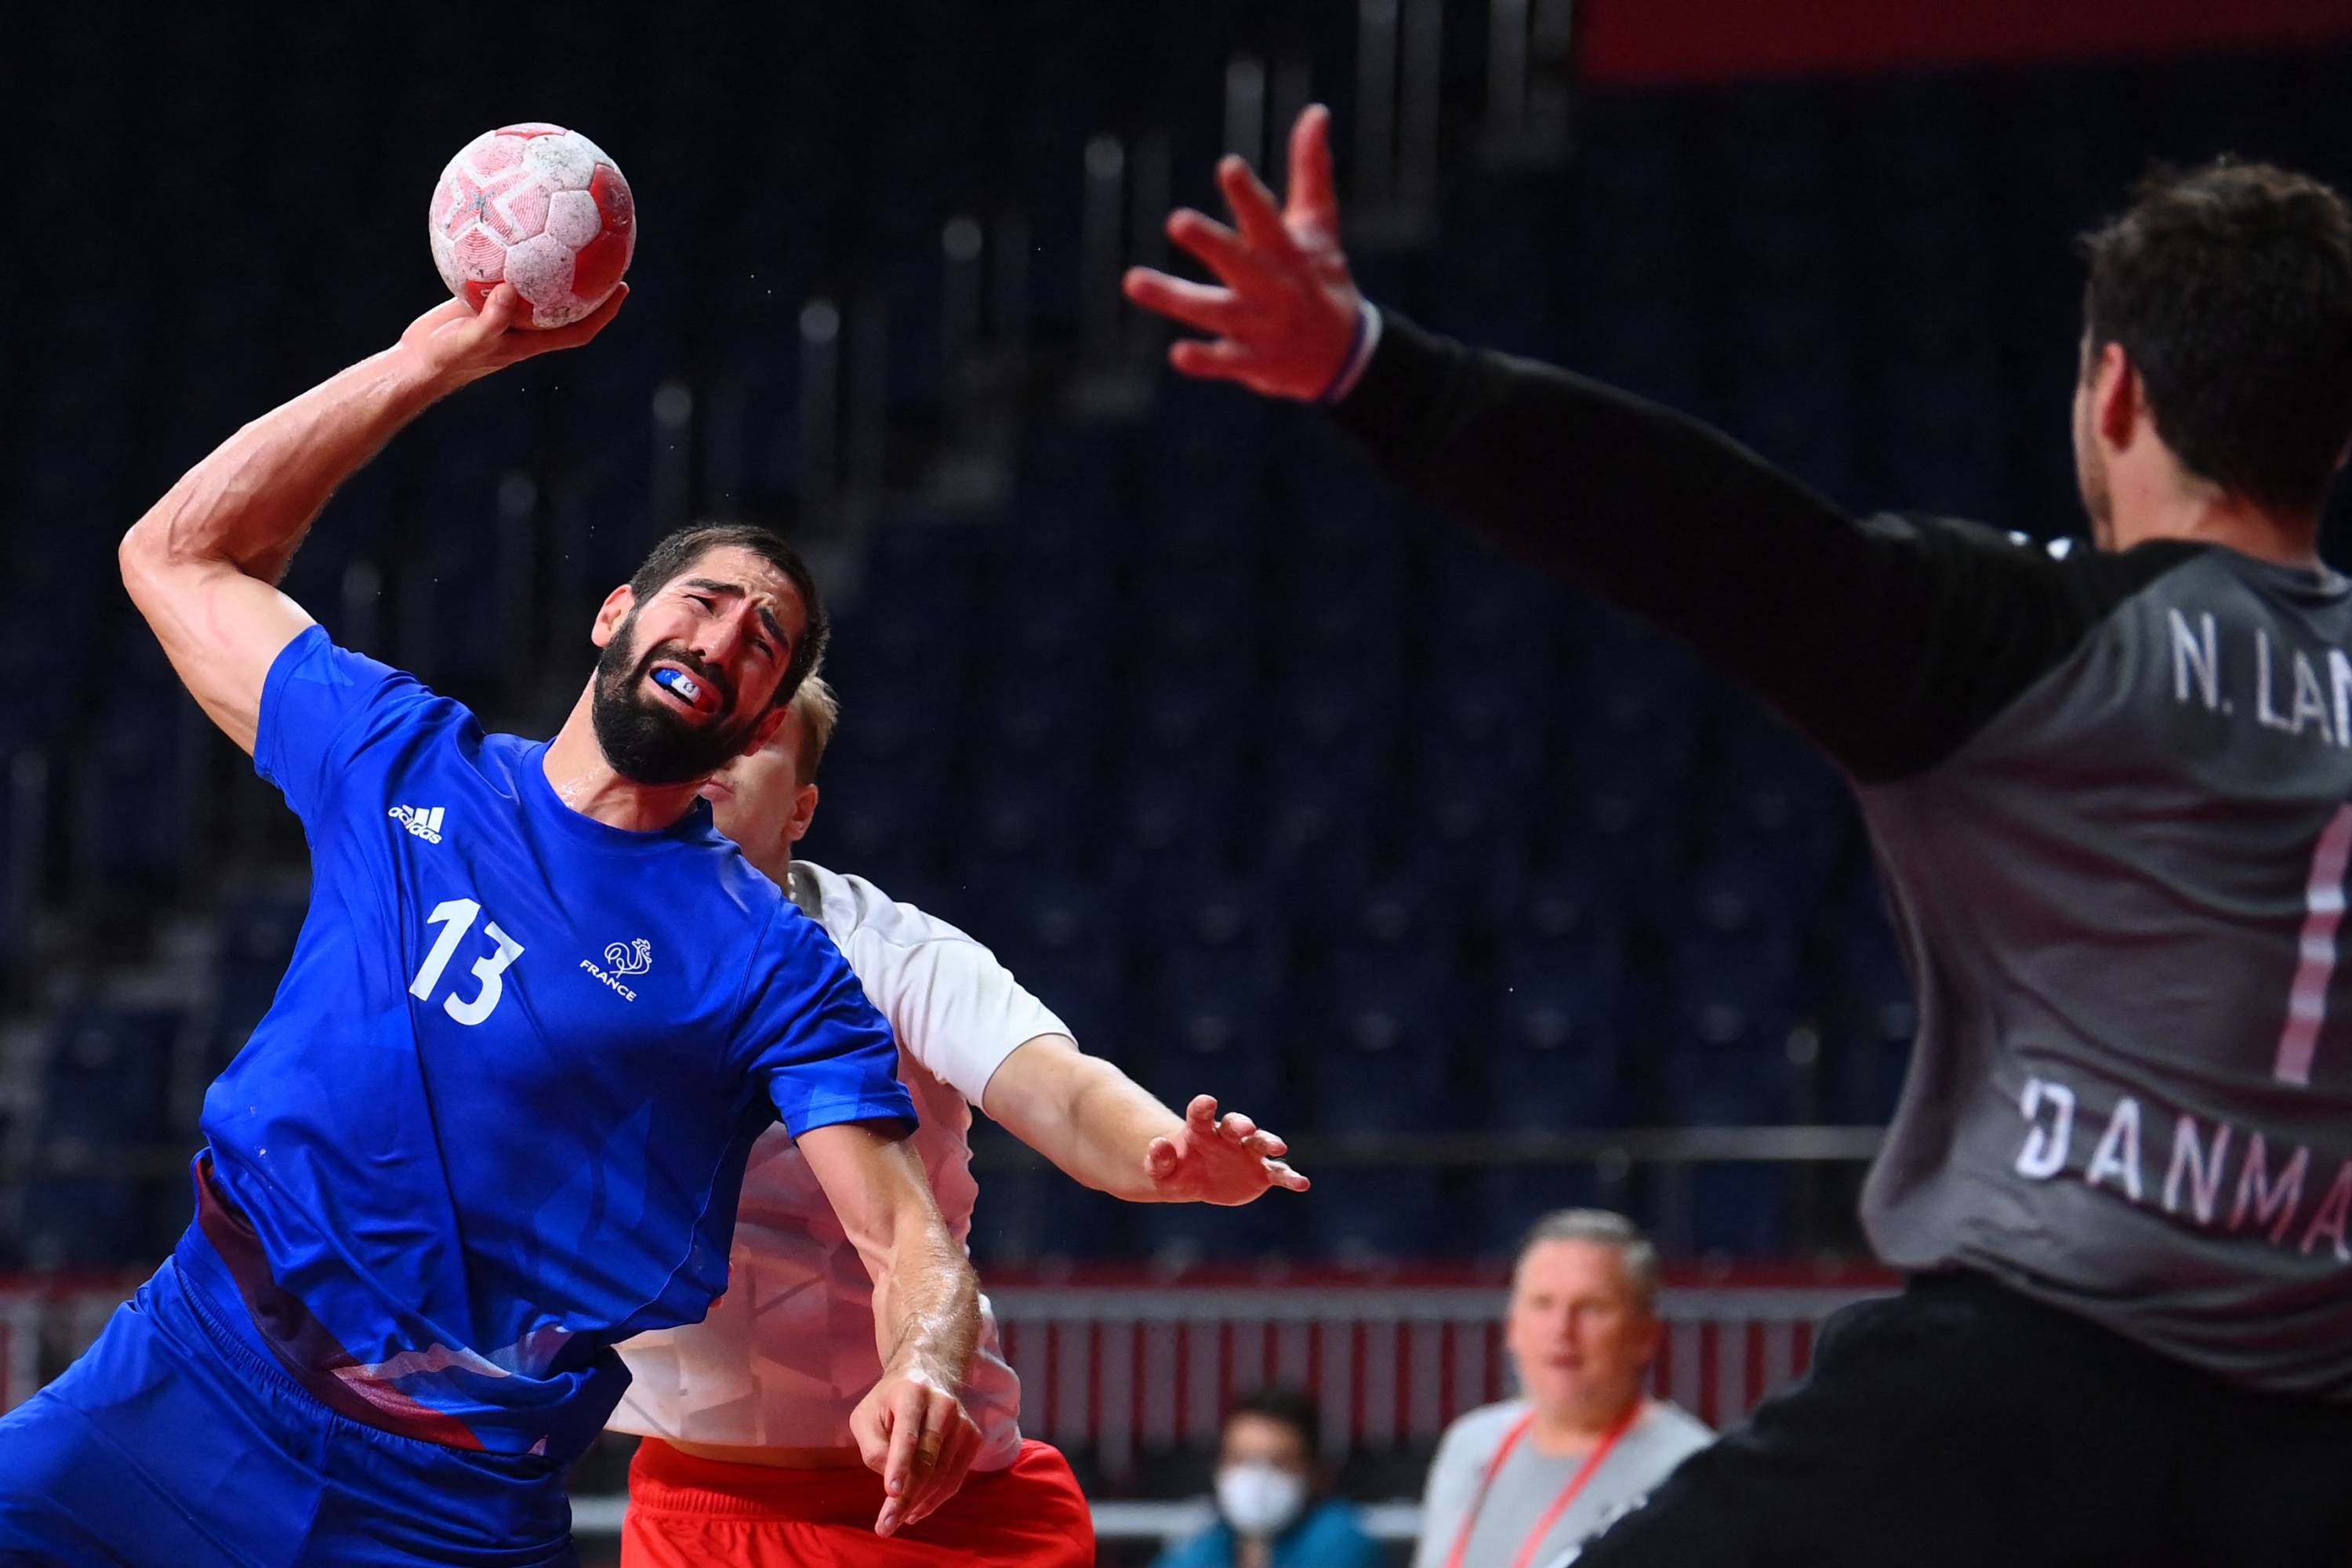 France's centre back Nikola Karabatic shoots and scores a goal during the men's final handball match between France and Denmark of the Tokyo 2020 Olympic Games at the Yoyogi National Stadium in Tokyo on August 7, 2021. (Photo by Franck FIFE / AFP)